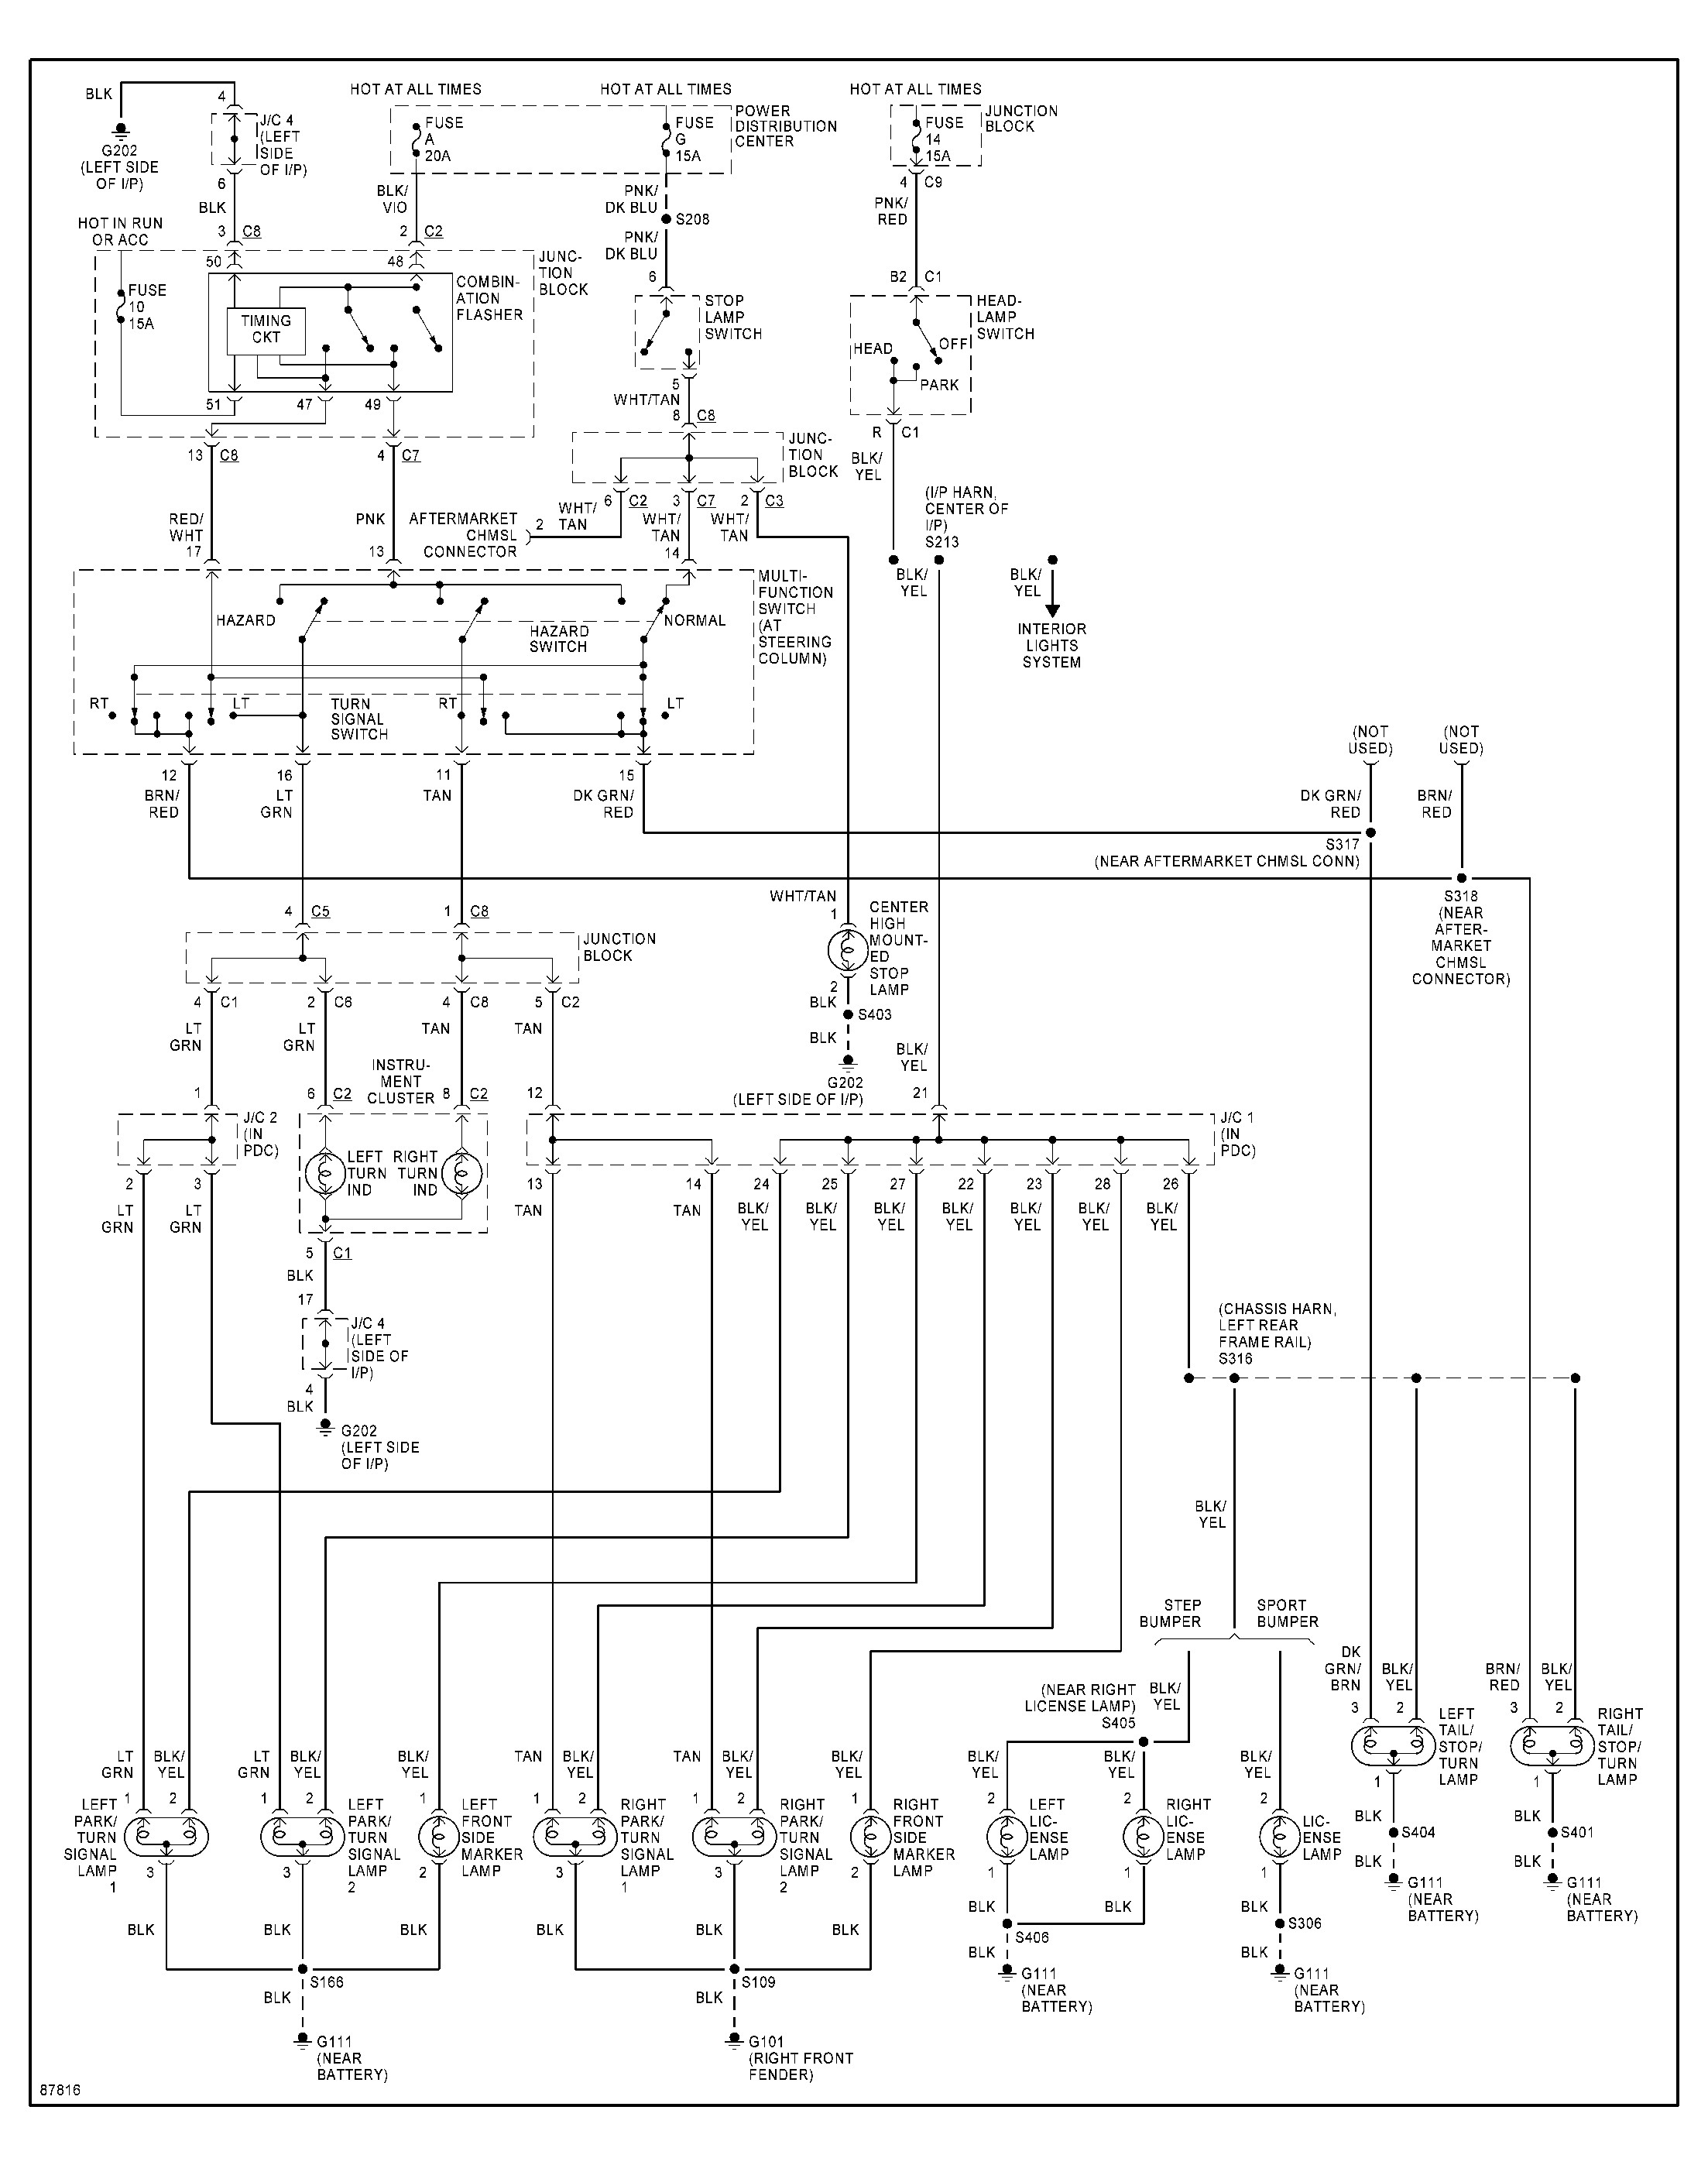 2002 toyota Tacoma Engine Diagram toyota Ta A Wiring Schematic toyota Wiring Diagrams Instructions Of 2002 toyota Tacoma Engine Diagram